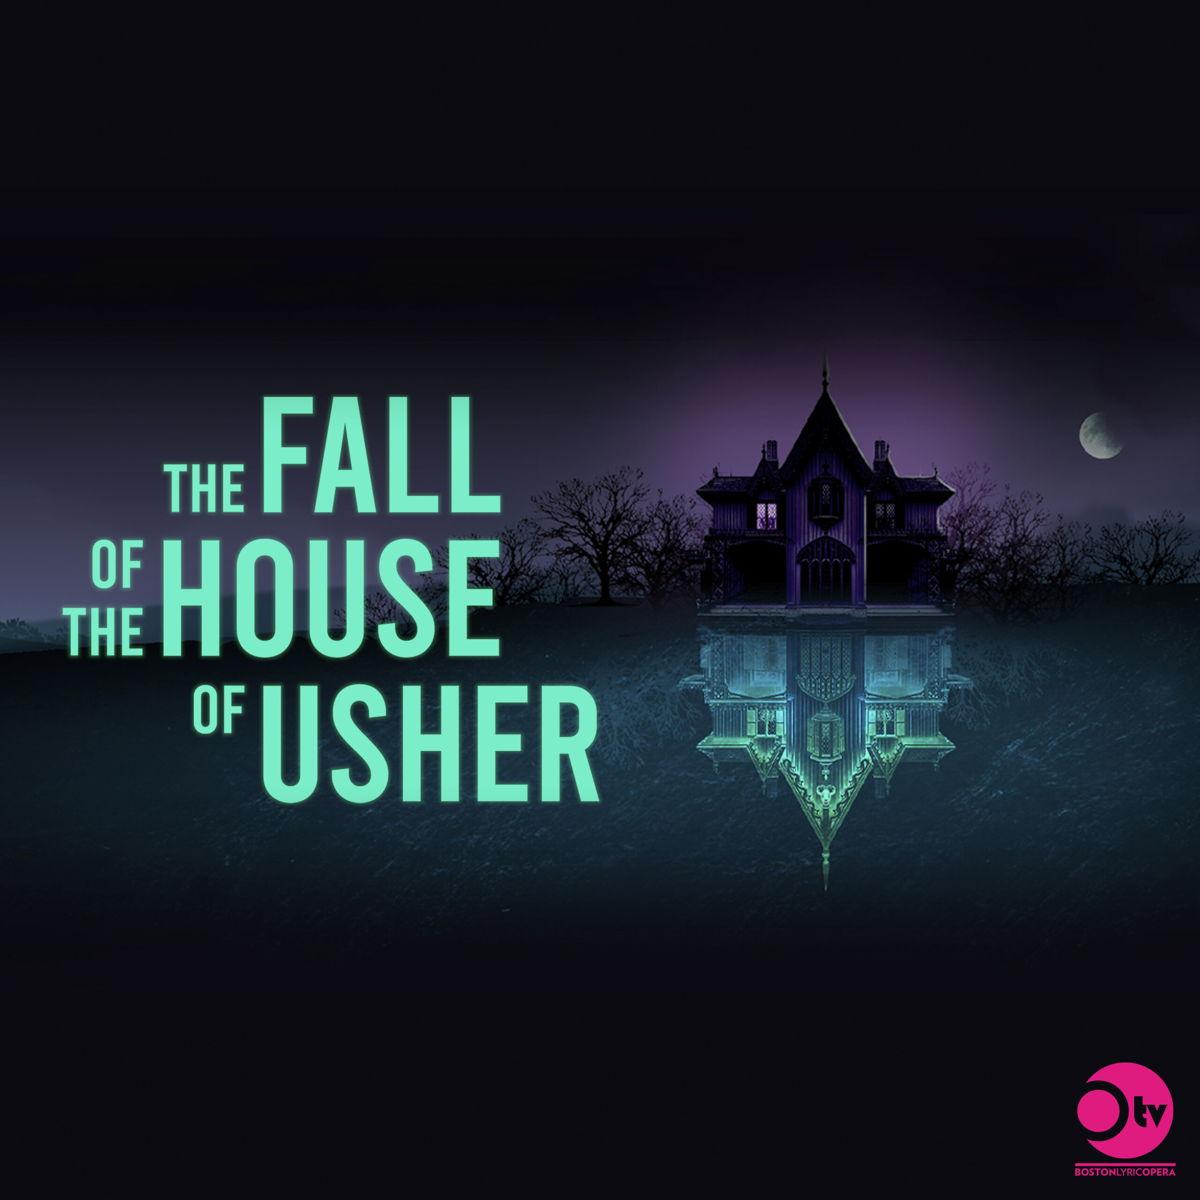 The ruthless Usher siblings have built a formidable empire, but their dark past is unveiled when a series of mysterious deaths haunt the family. A mysterious woman from their youth resurfaces, unearthing long-buried secrets that threaten to consume them all.